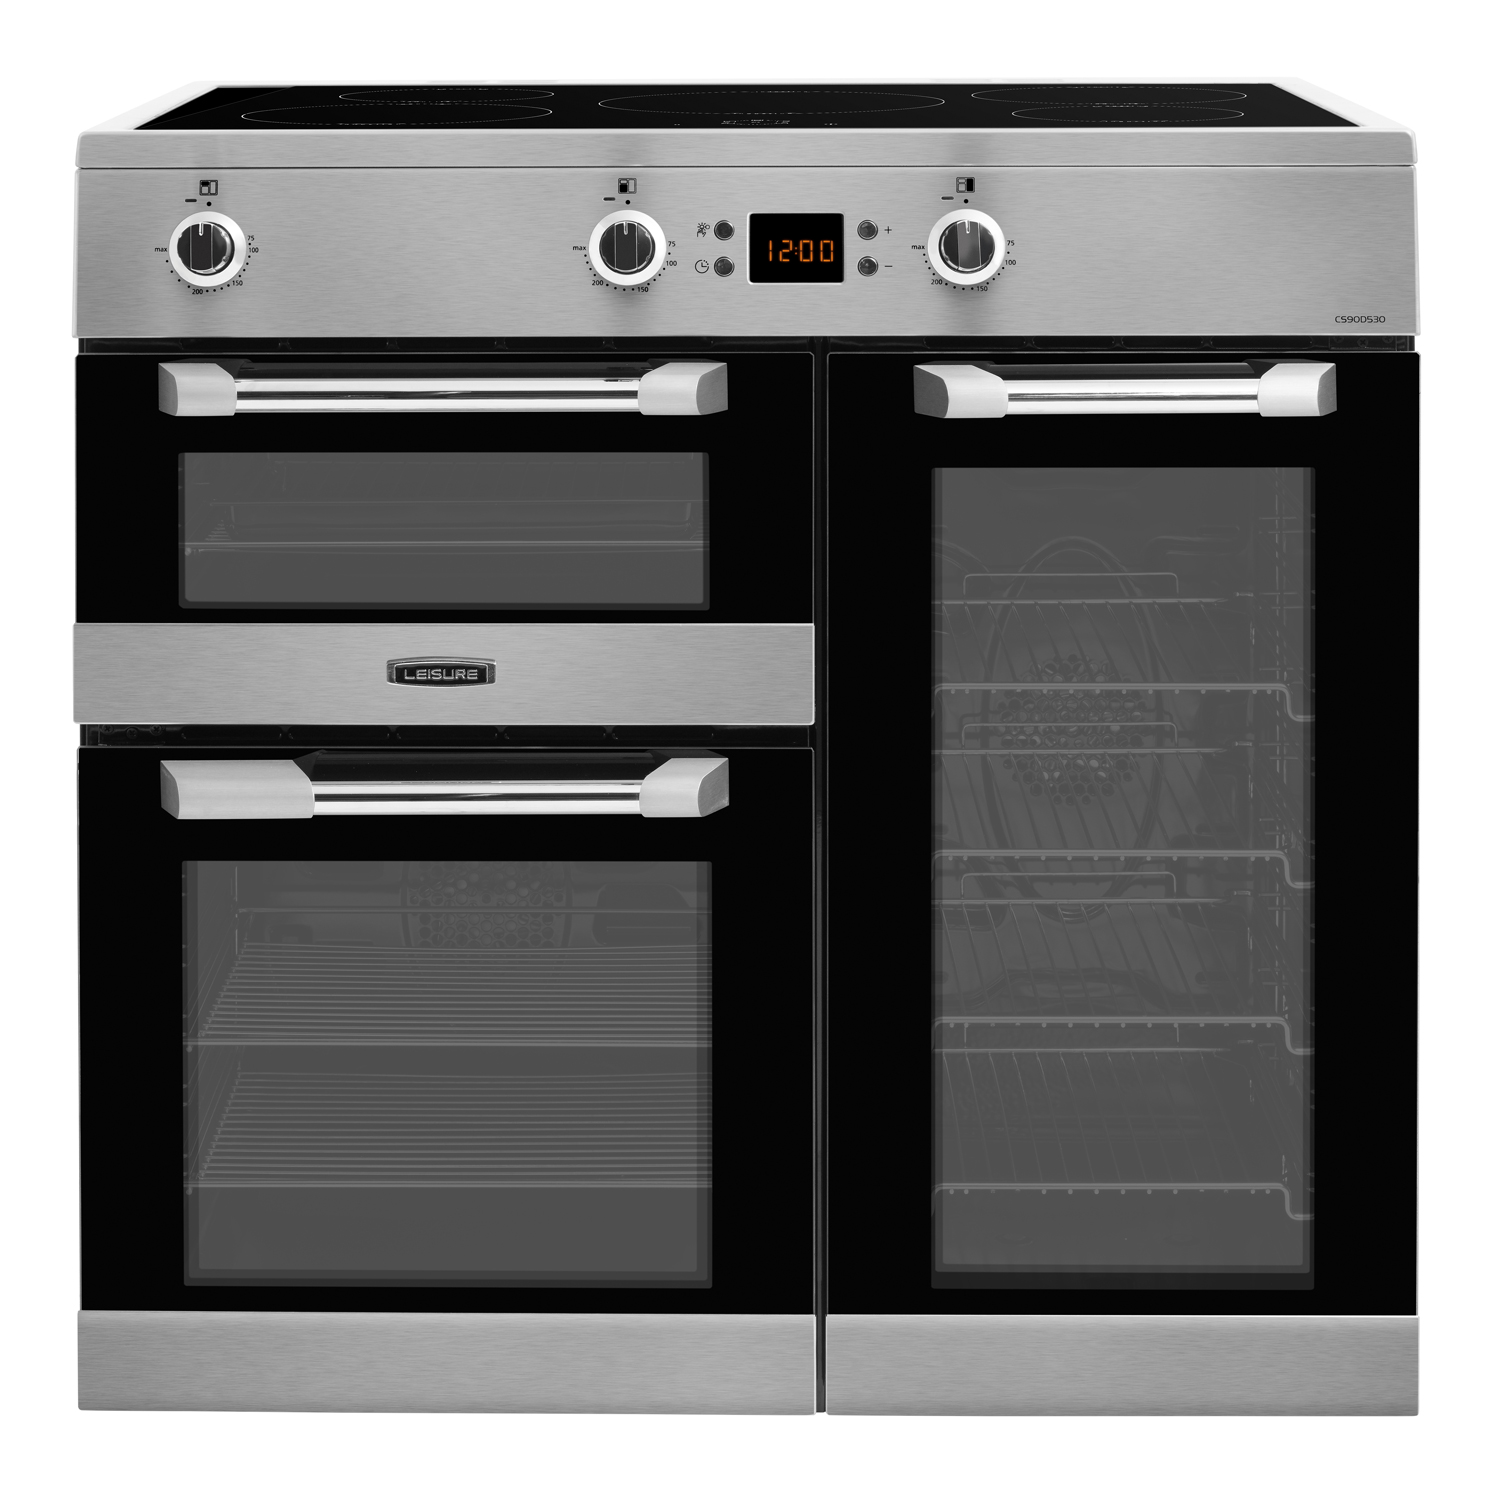 Leisure Cuisinemaster CS90D 530X range cooker with induction hob